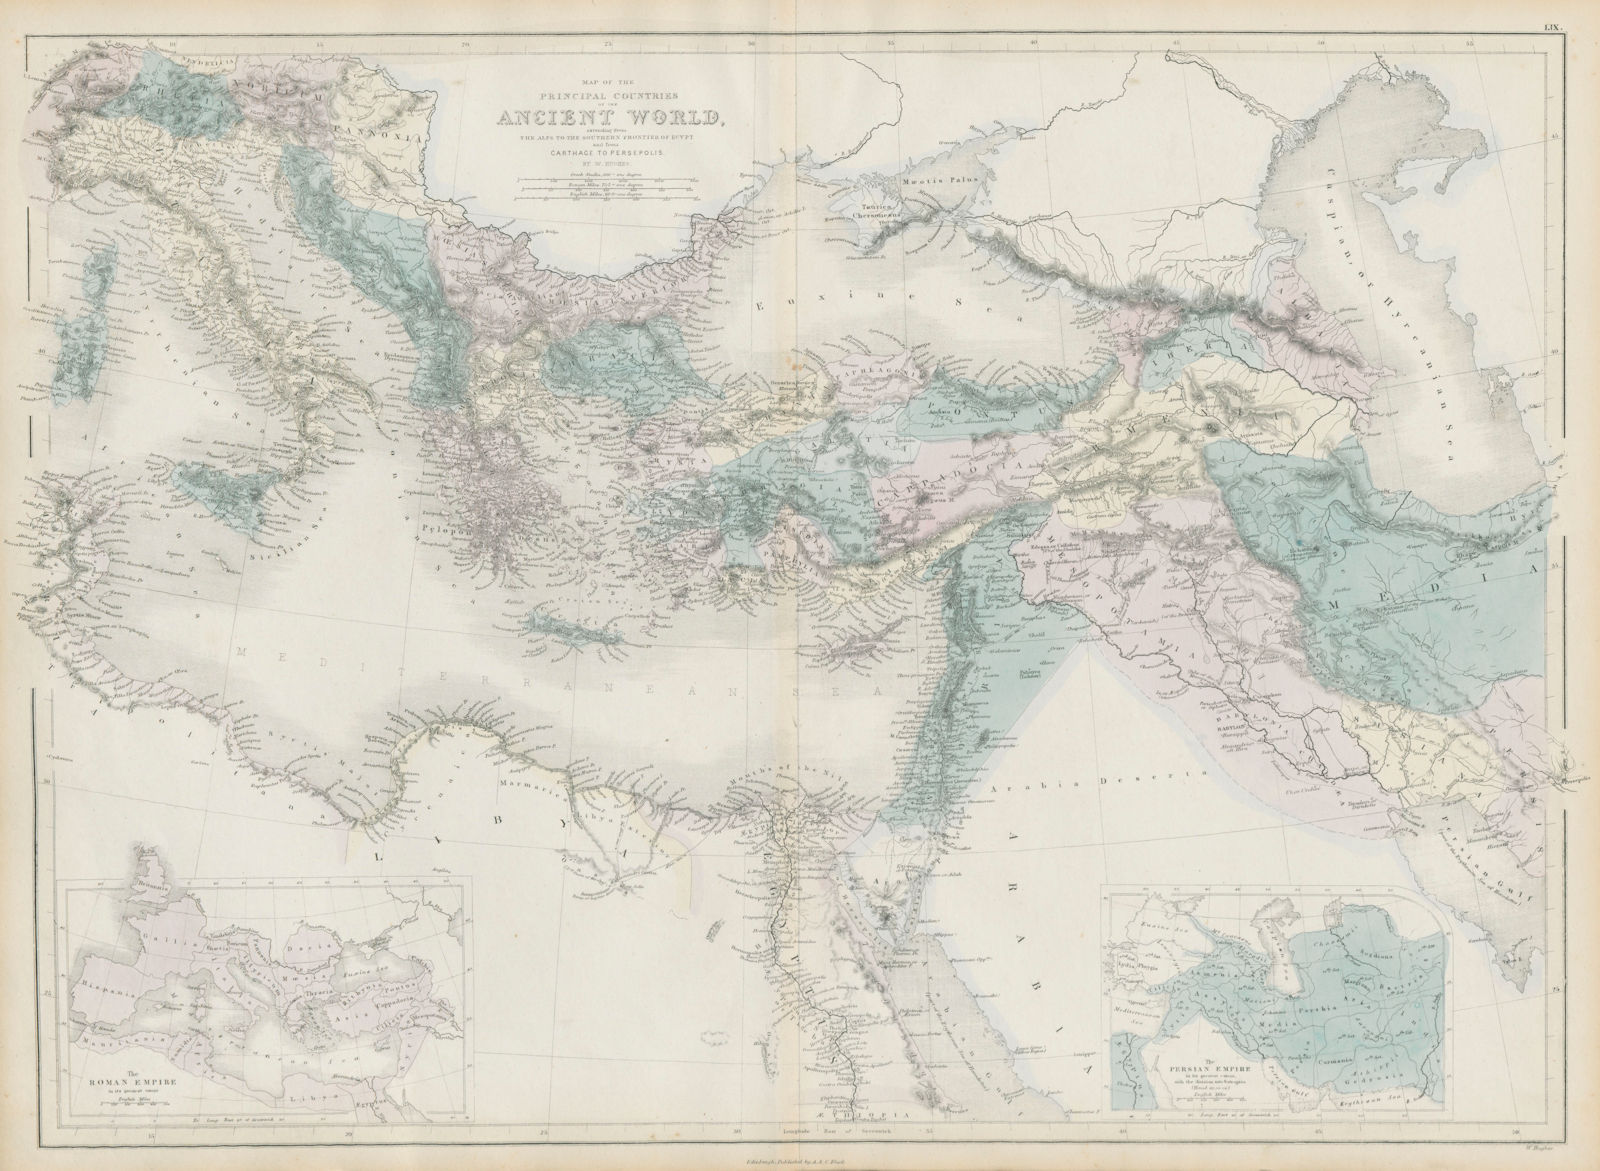 Countries of the Ancient World… from the Alps… to Persepolis. HUGHES 1856 map